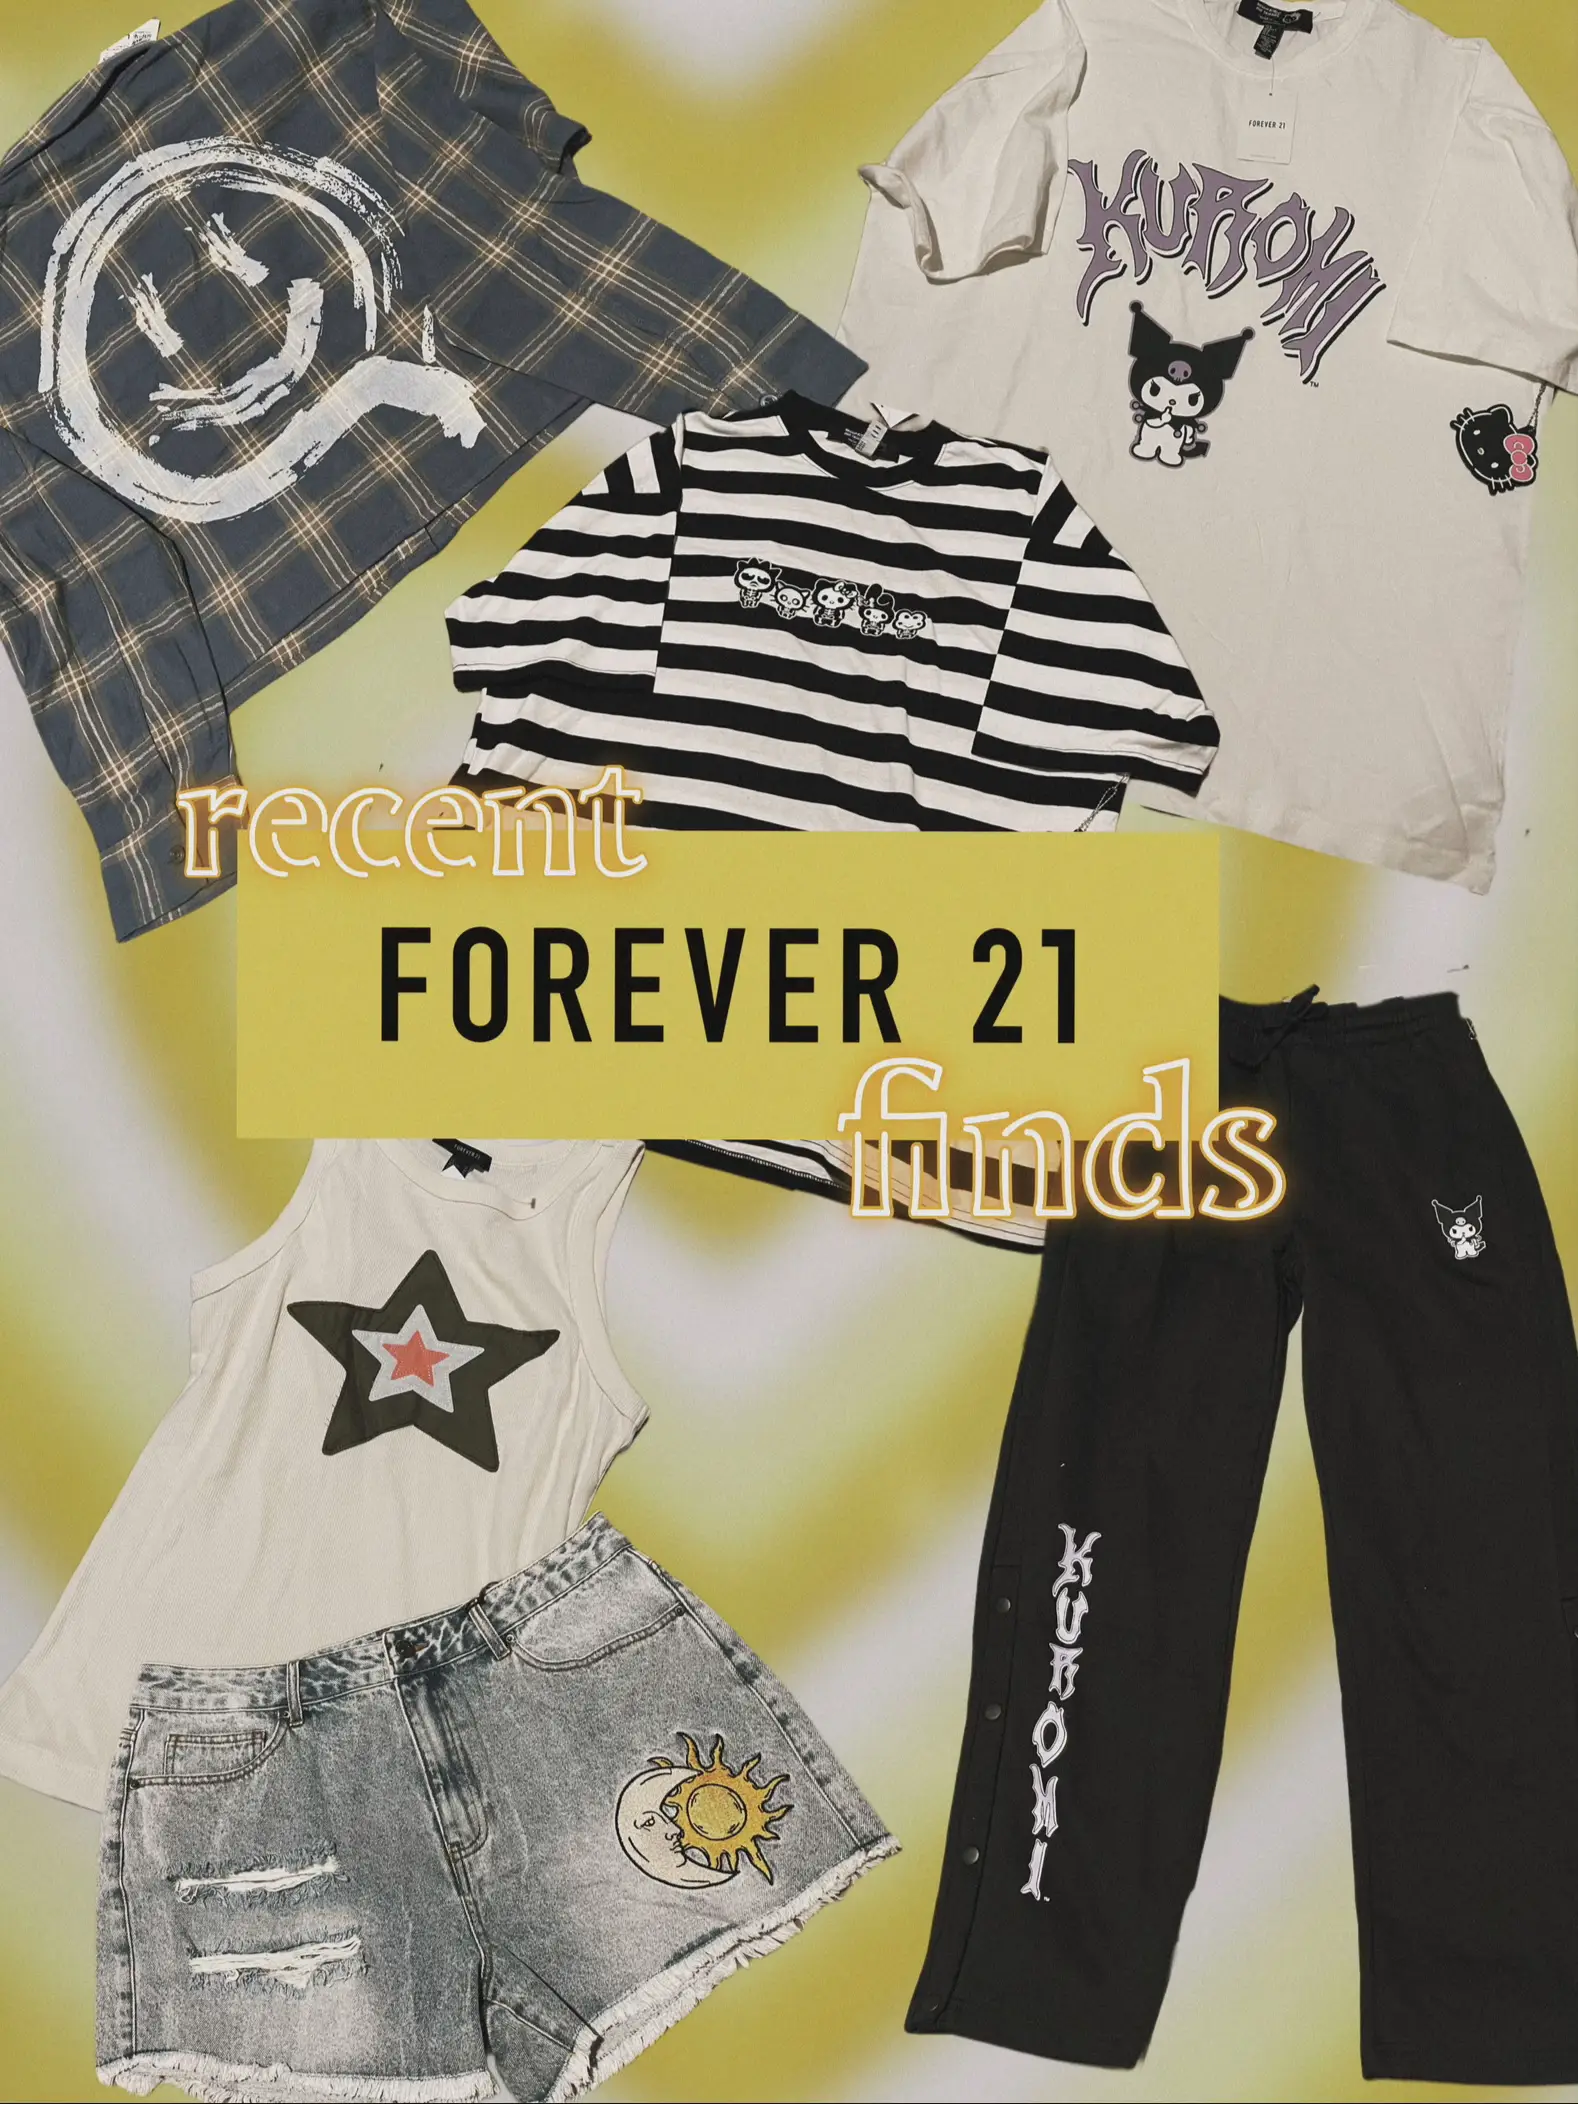 Shop with me for cute summer outfits at Forever 21! 💖 I fell in love